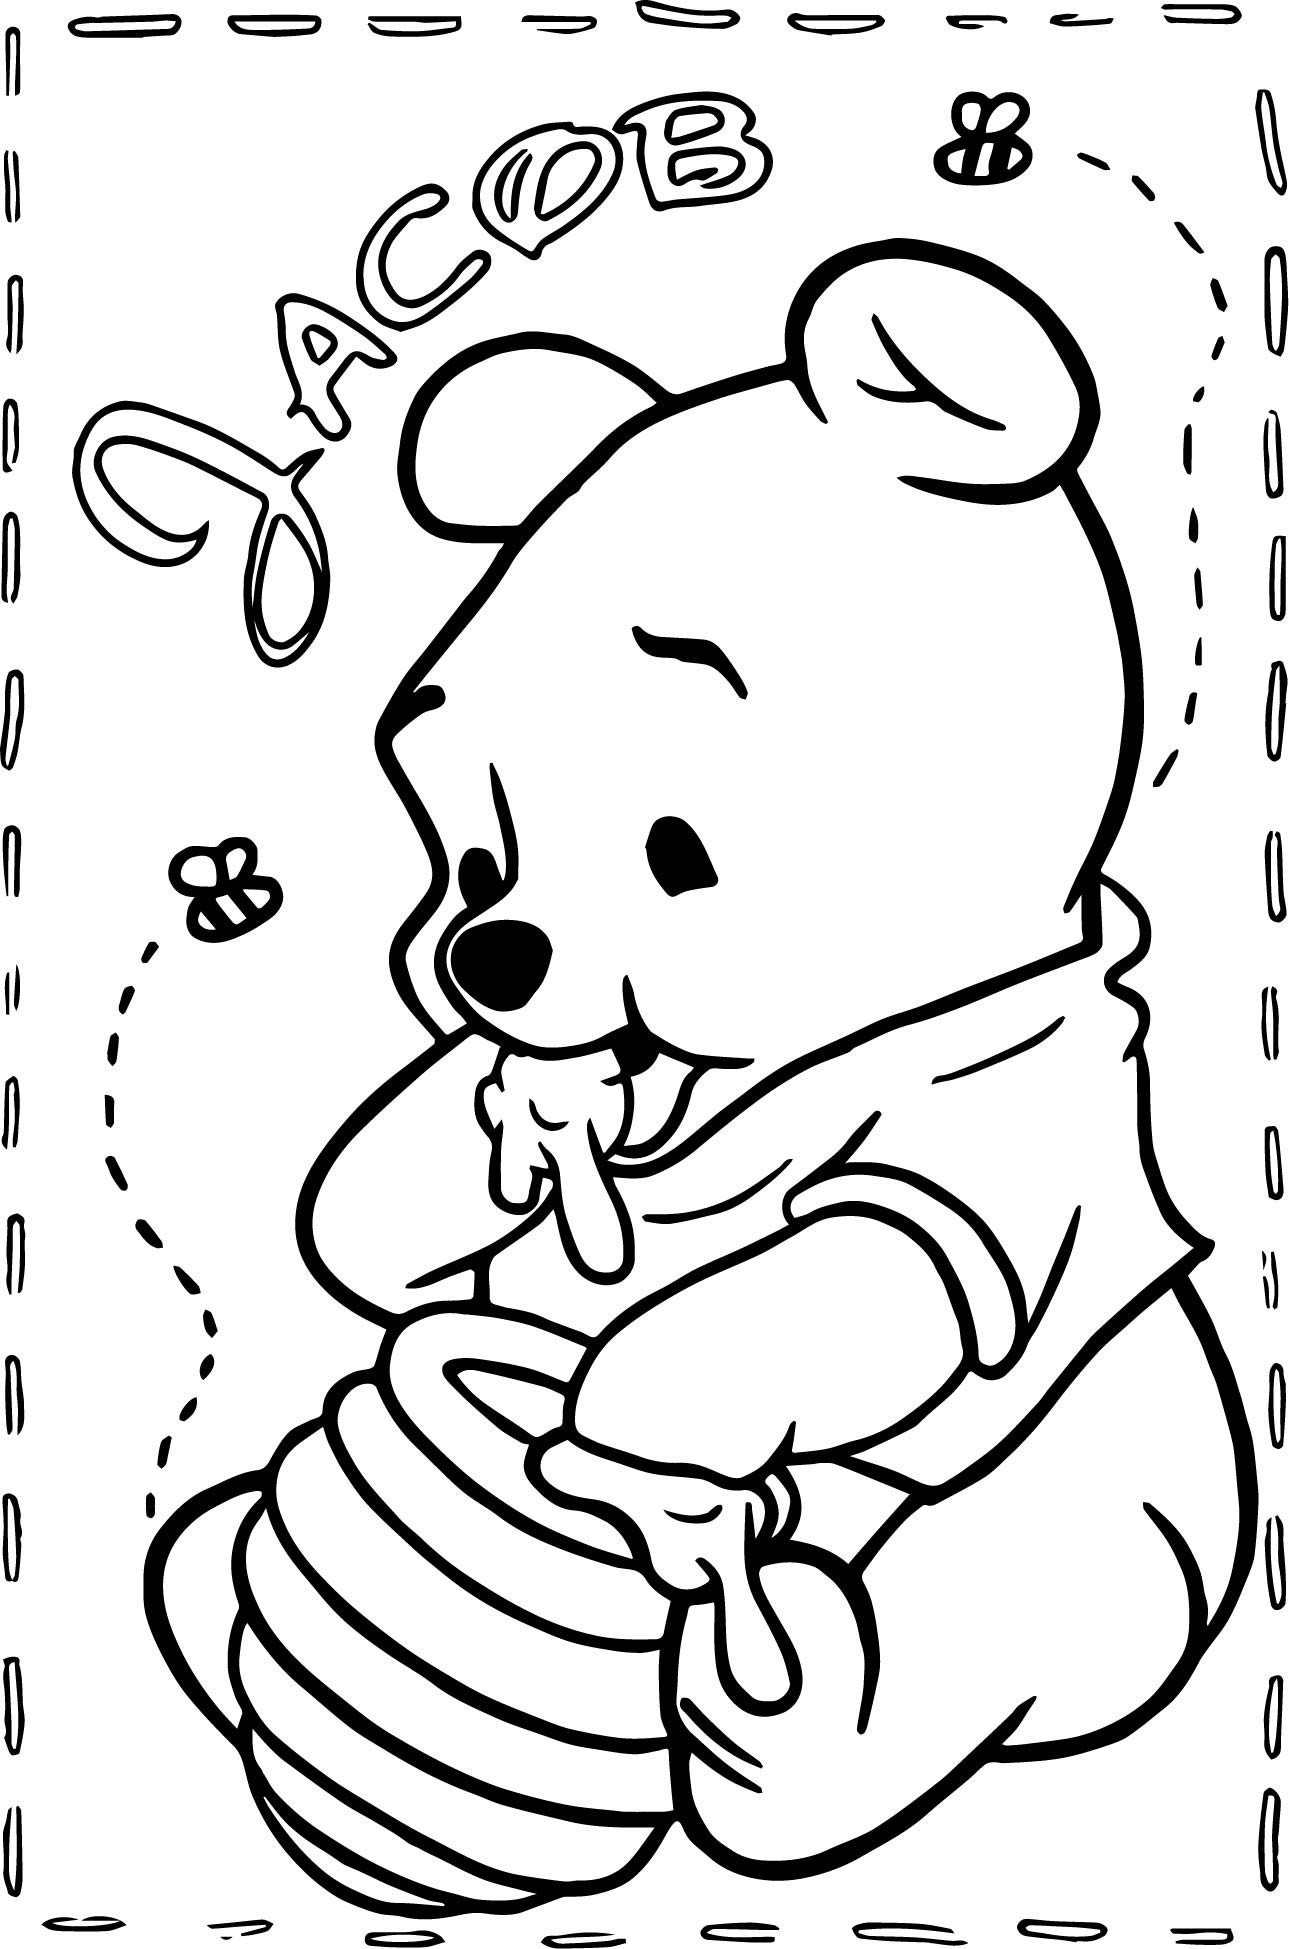 Coloring Book Pages For Winnie The Pooh
 Baby Winnie The Pooh Coloring Page